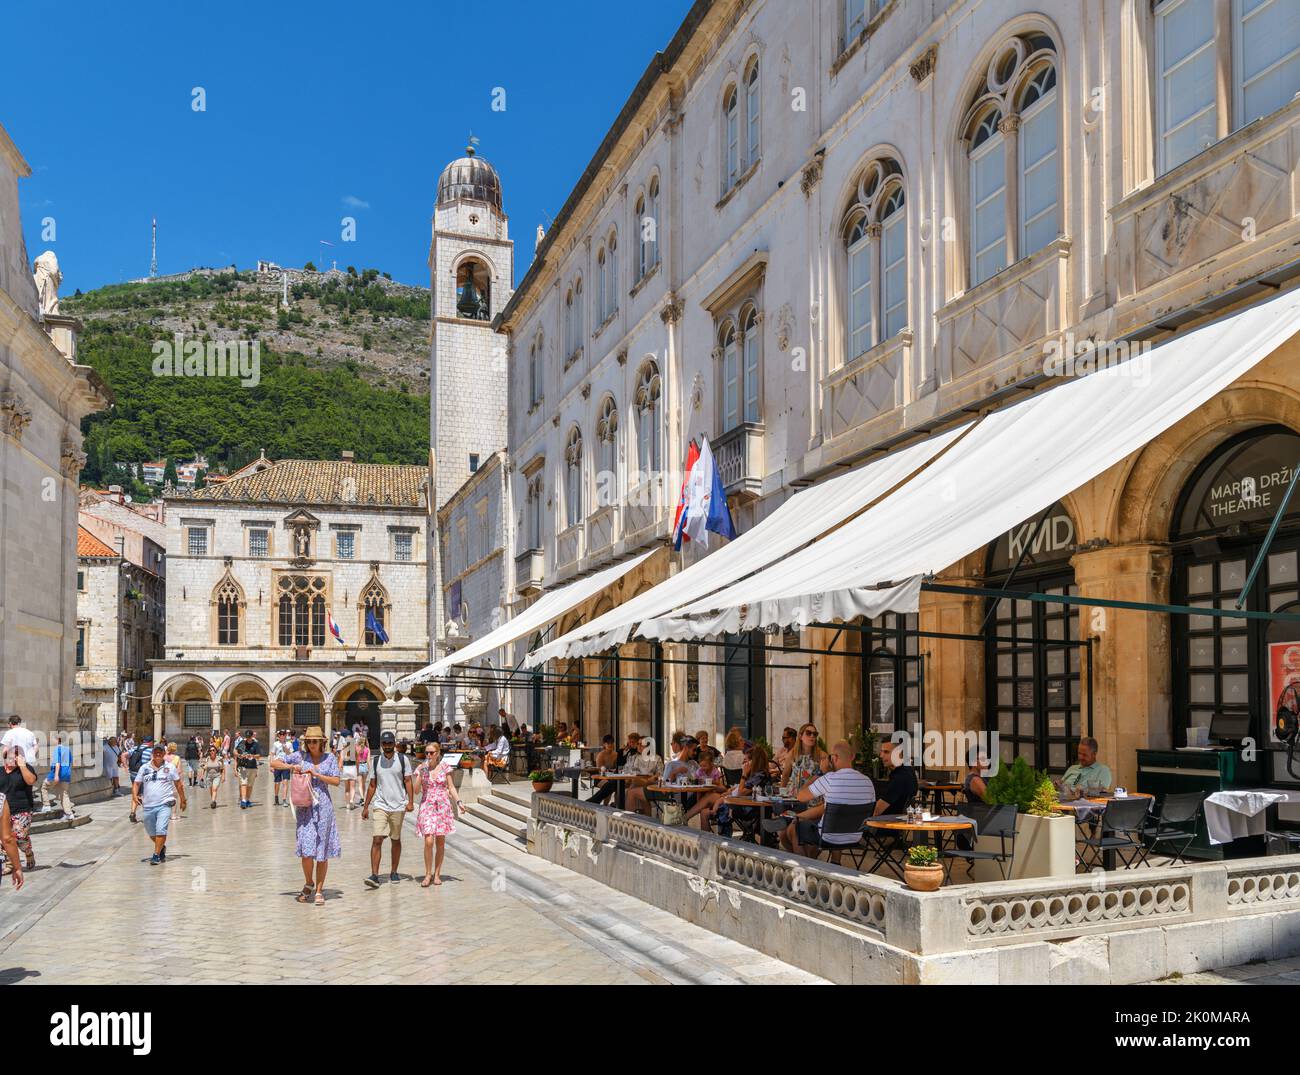 Cafes and restaurants on Ulica Pred Dvorom looking towards the Sponza Palace, Old Town, Dubrovnik, Croatia Stock Photo